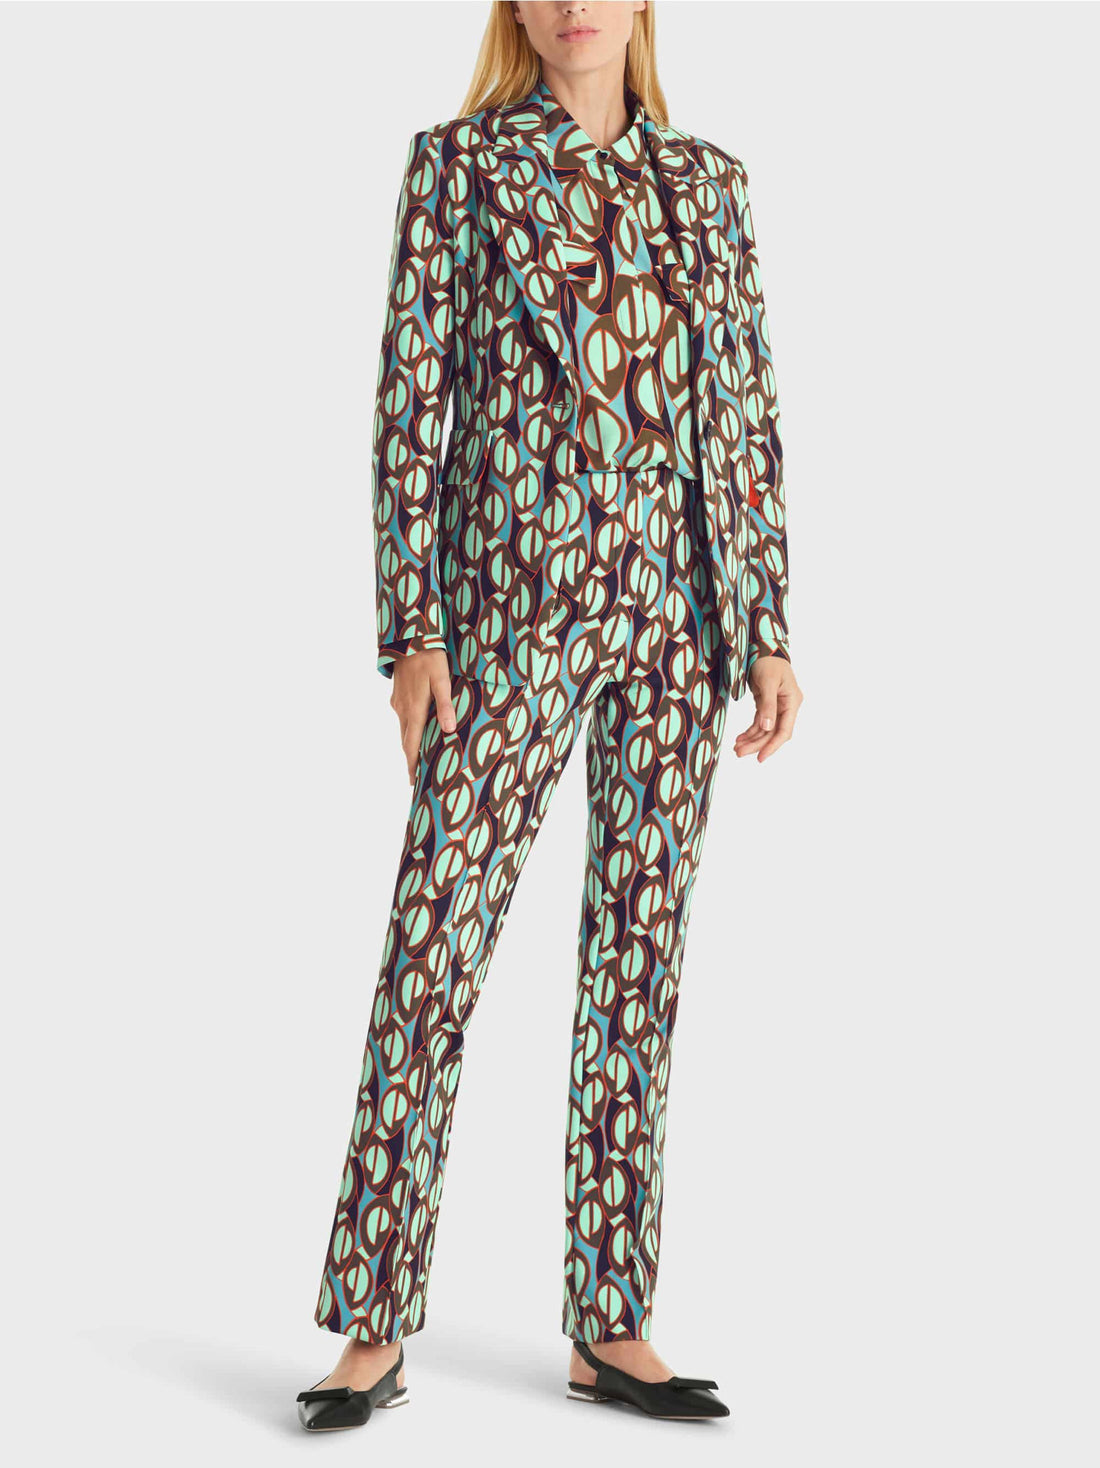 Frederica Pants With All-Over Print_WC 81.28 J01_562_01